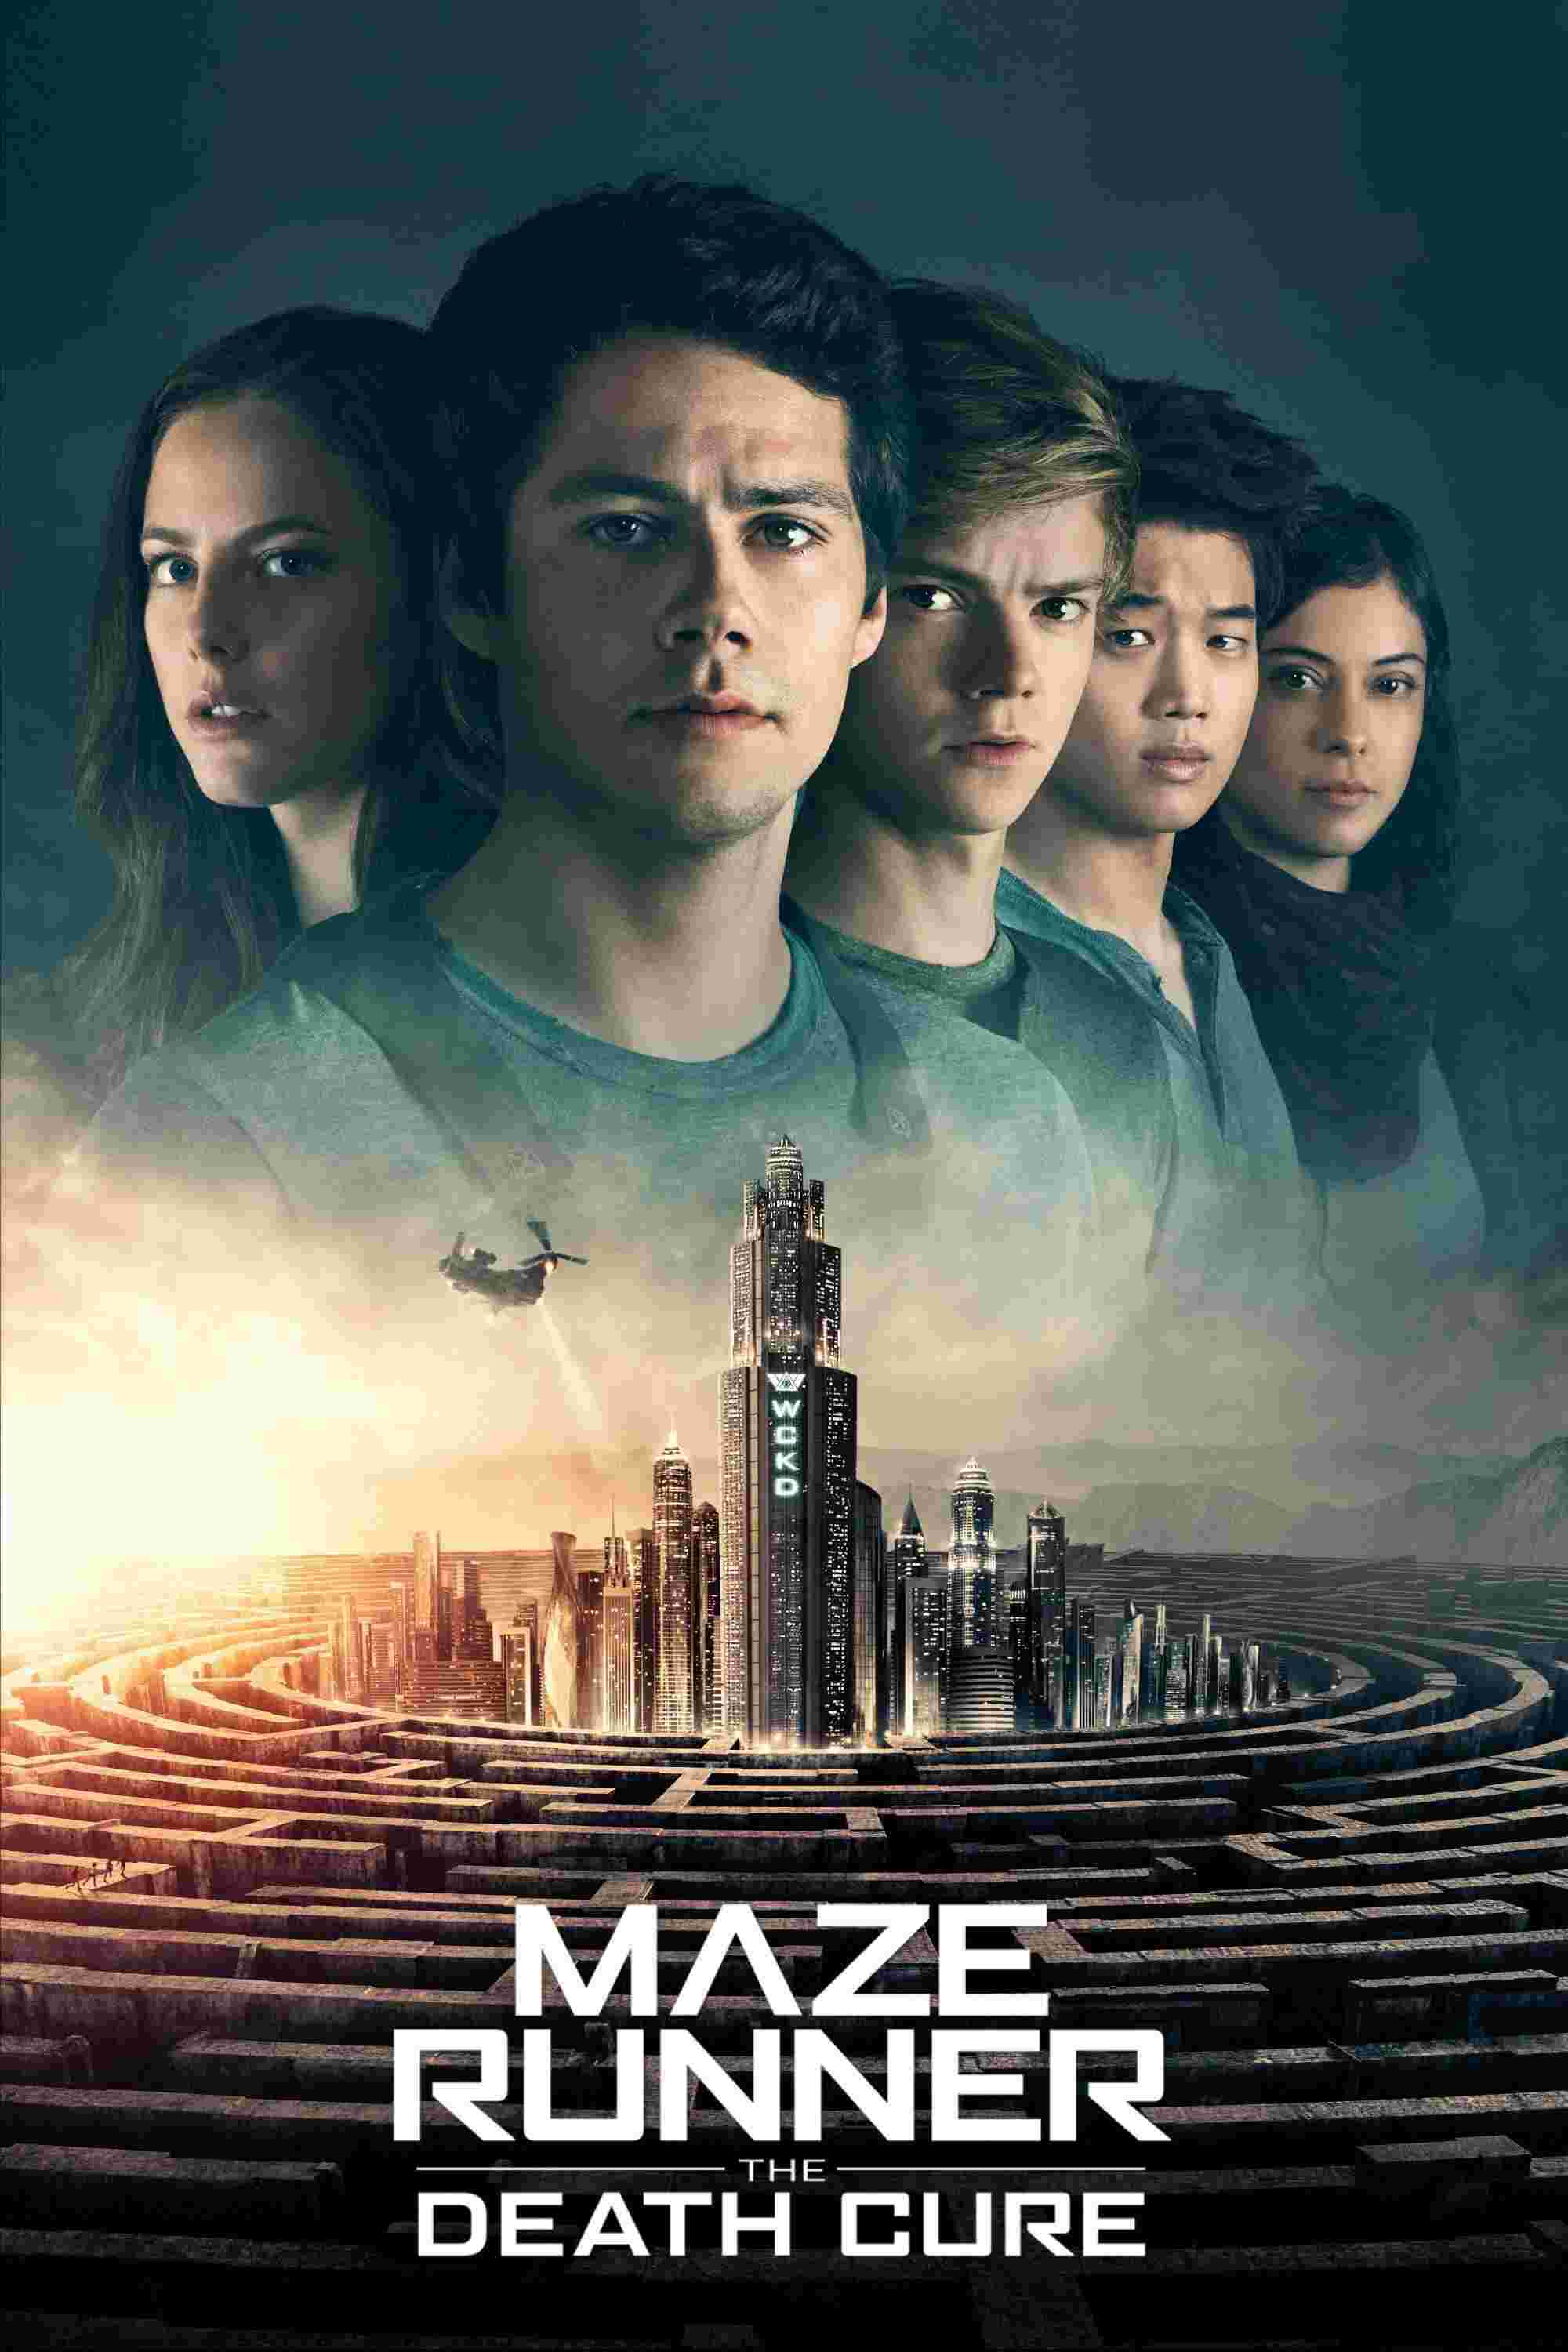 Maze Runner: The Death Cure (2018) Dylan O'Brien